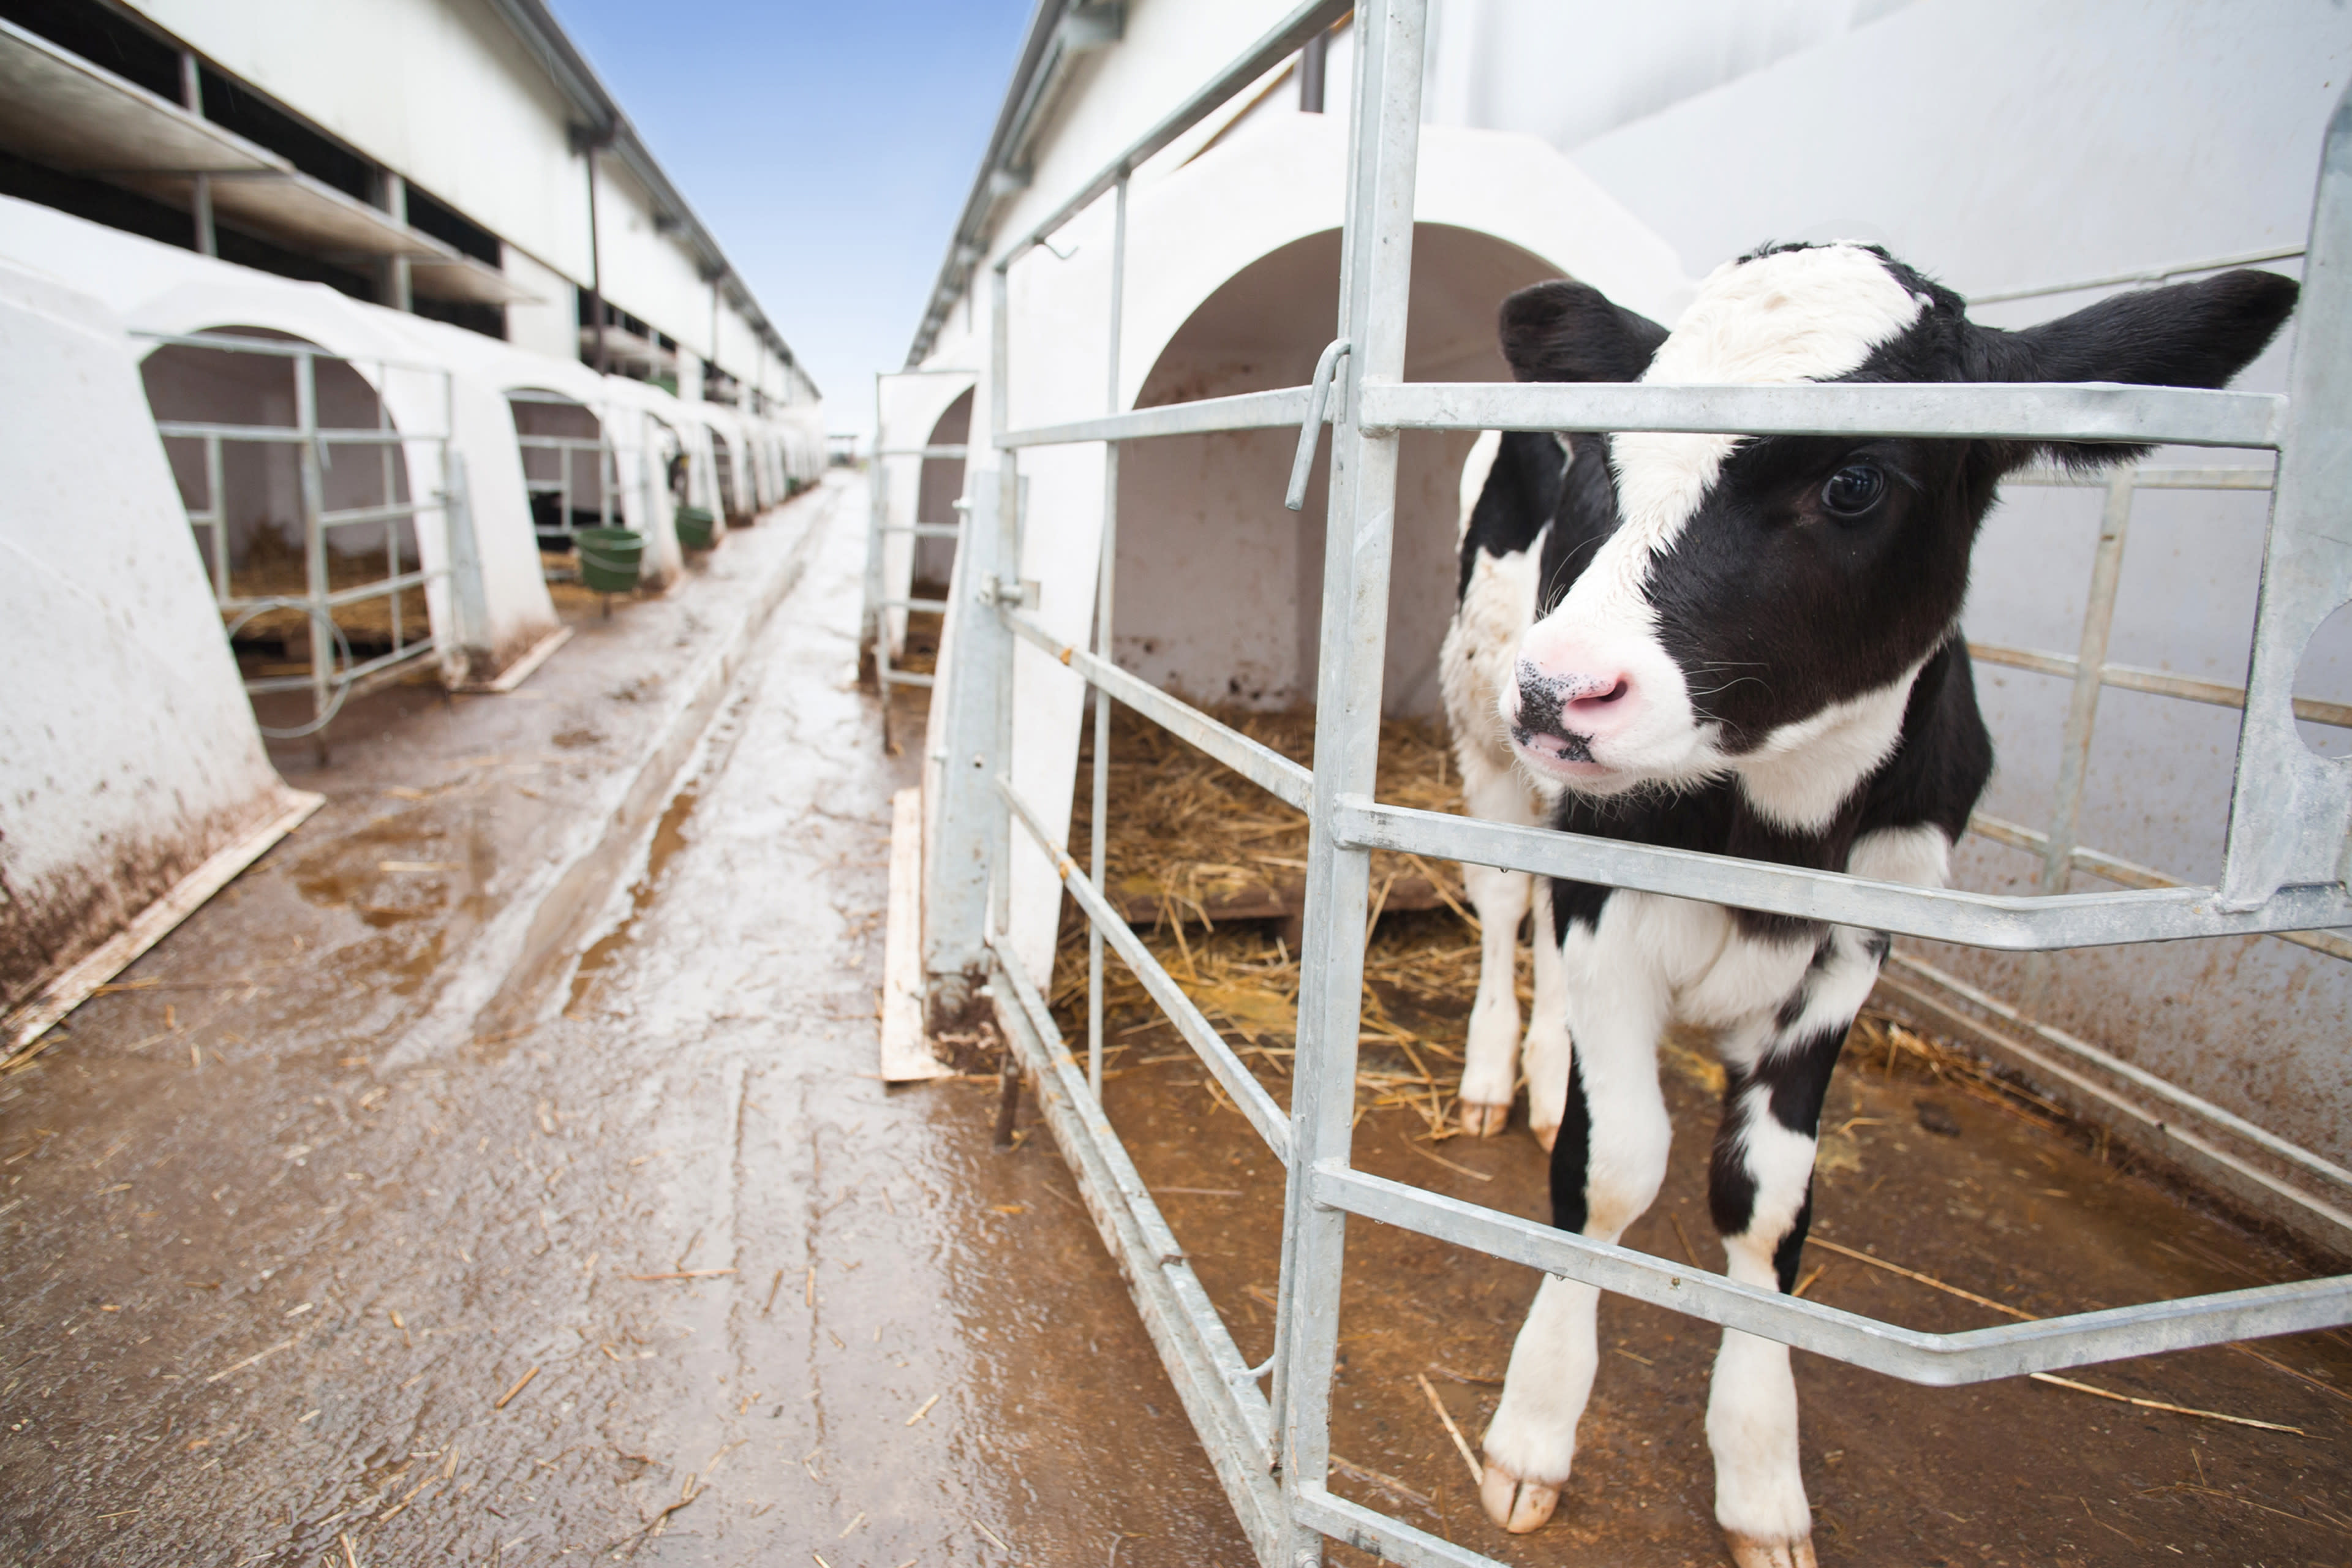 Male Dairy Cows Don't Get to Live More Than Two Years